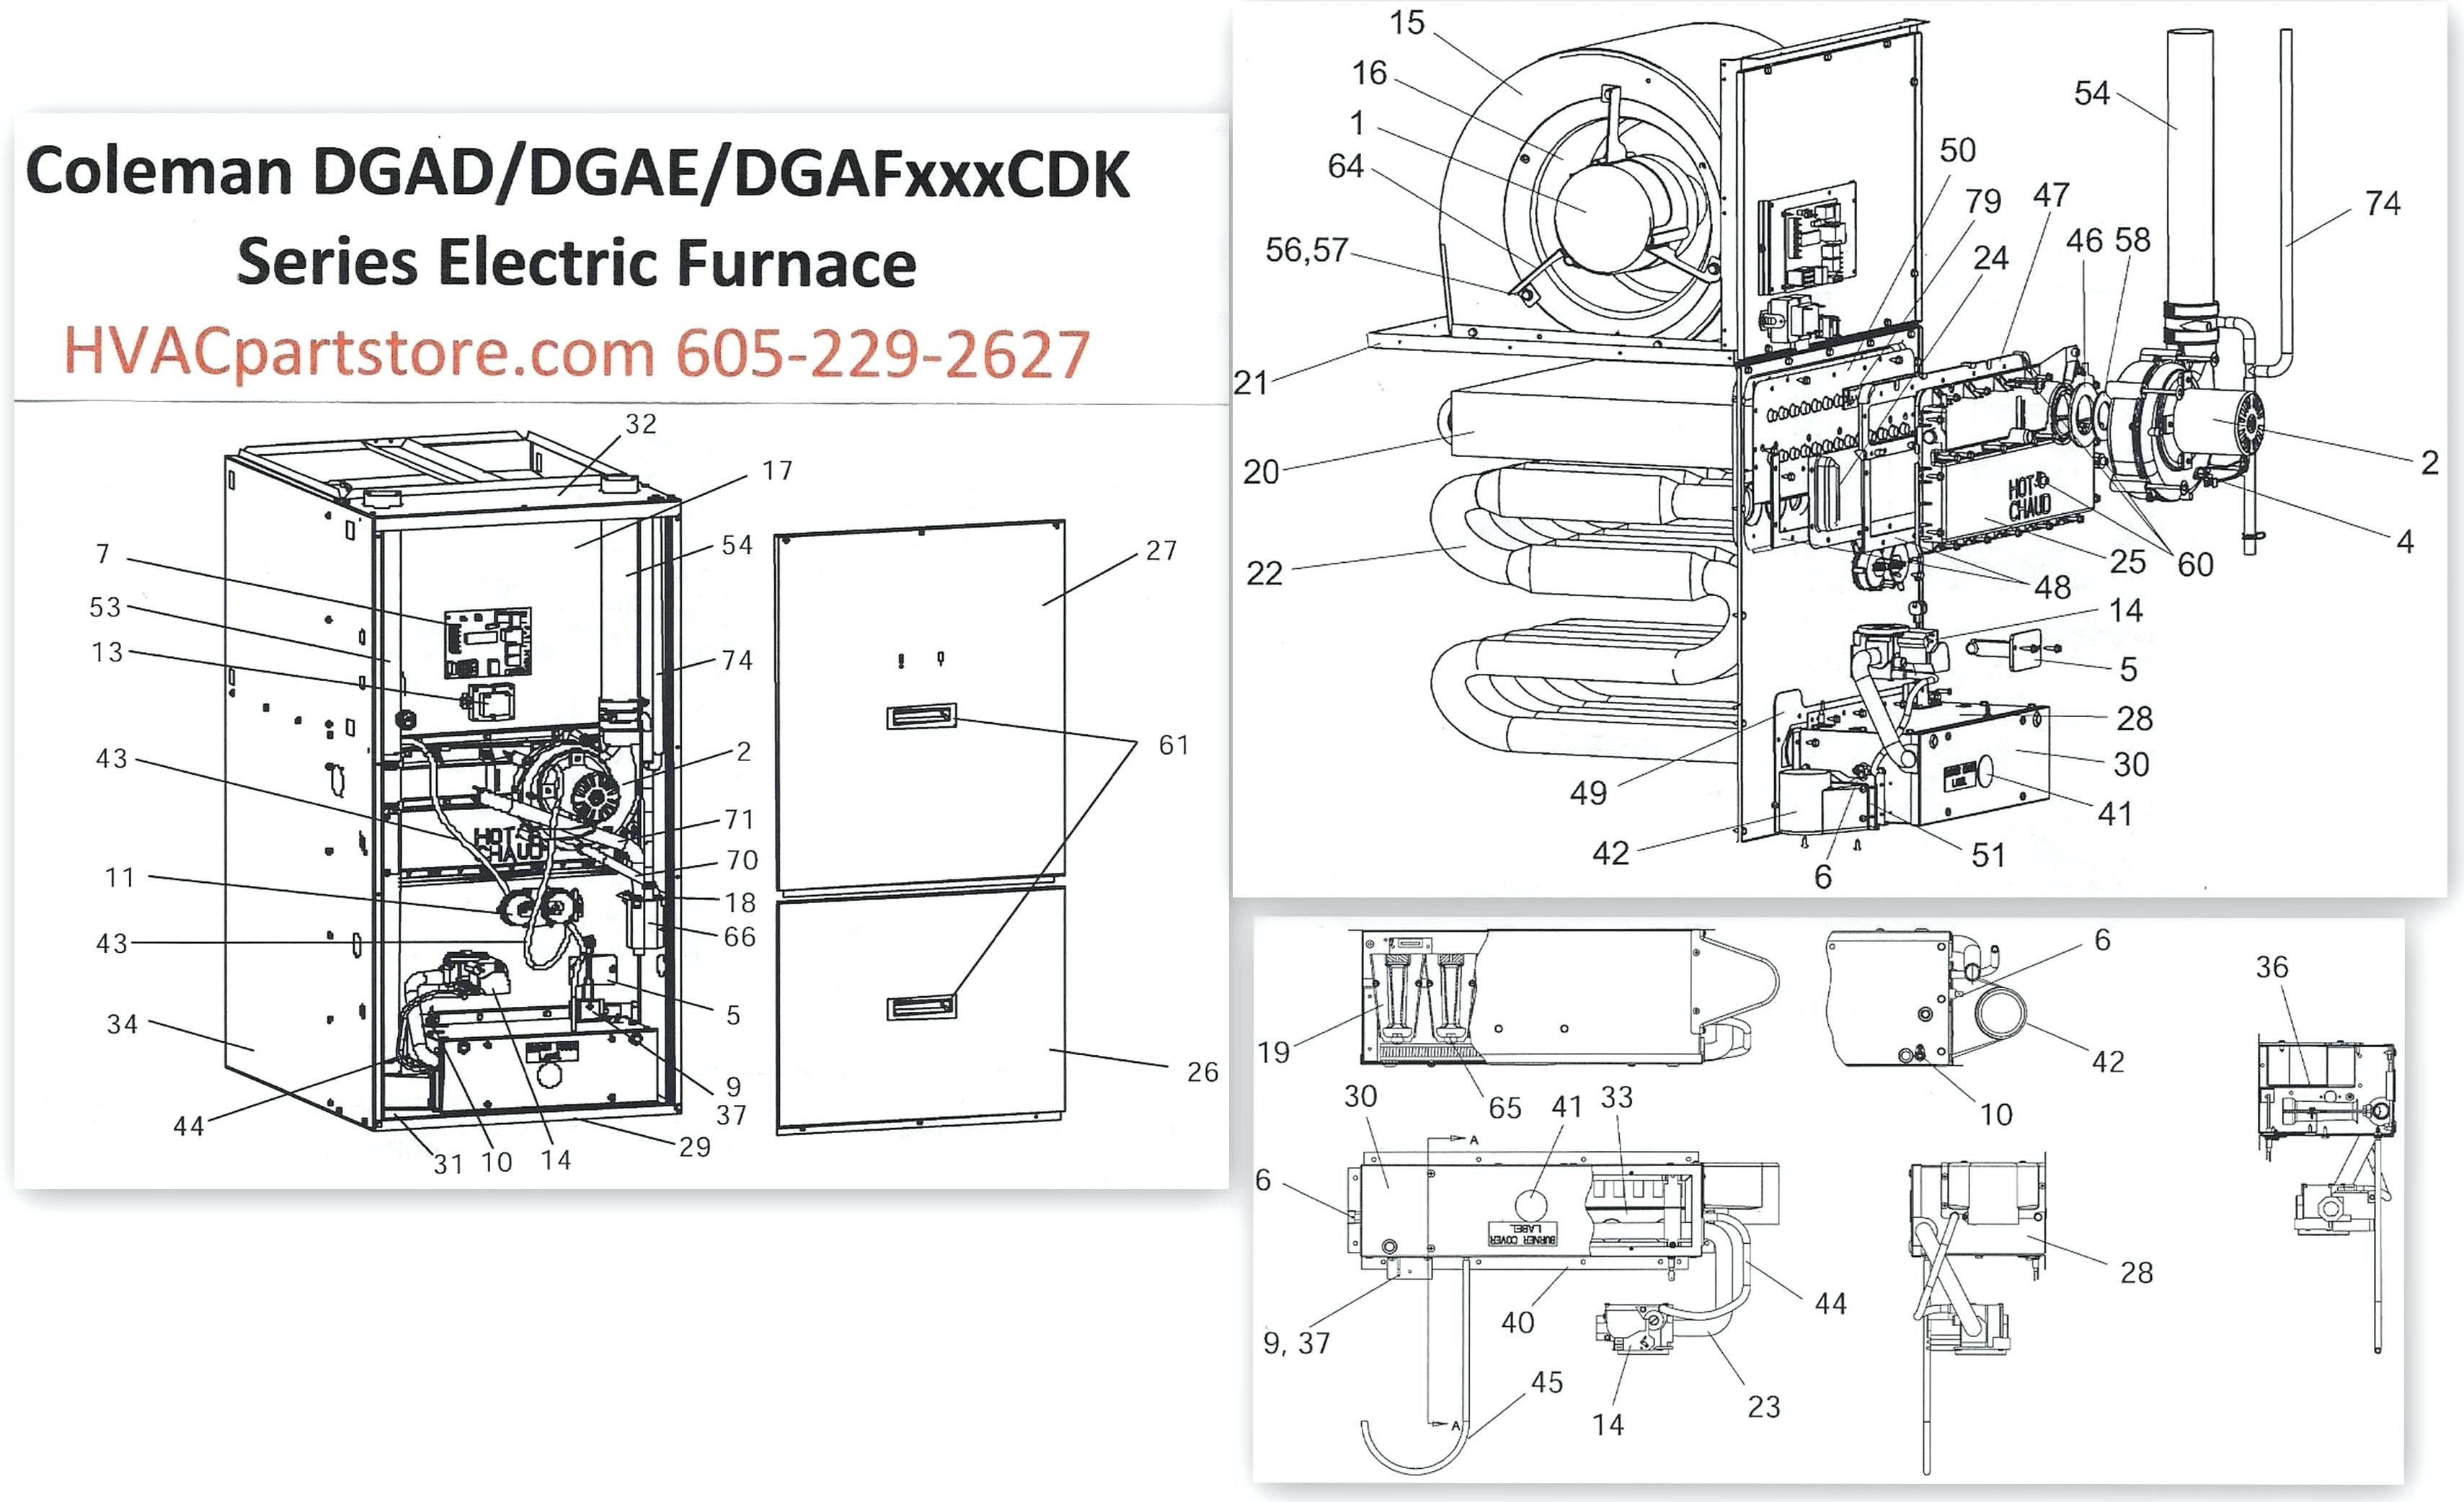 Goodman Furnace Parts Diagram New Gas Furnace Control Board Wiring Diagram Edmyedguide24 Of Goodman Furnace Parts Diagram